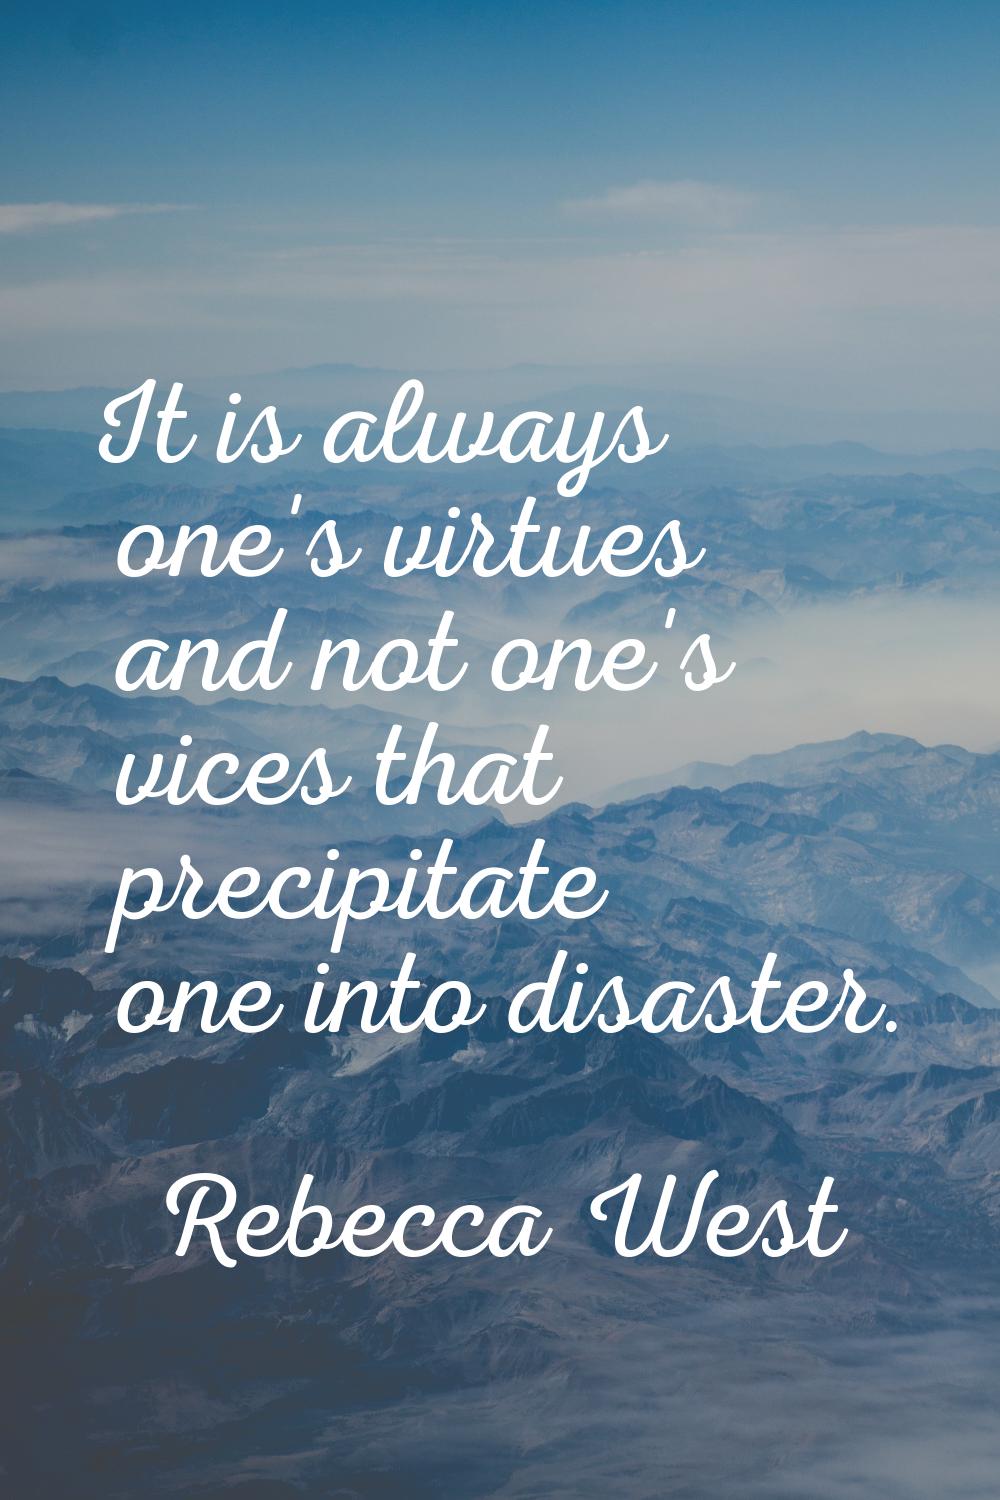 It is always one's virtues and not one's vices that precipitate one into disaster.